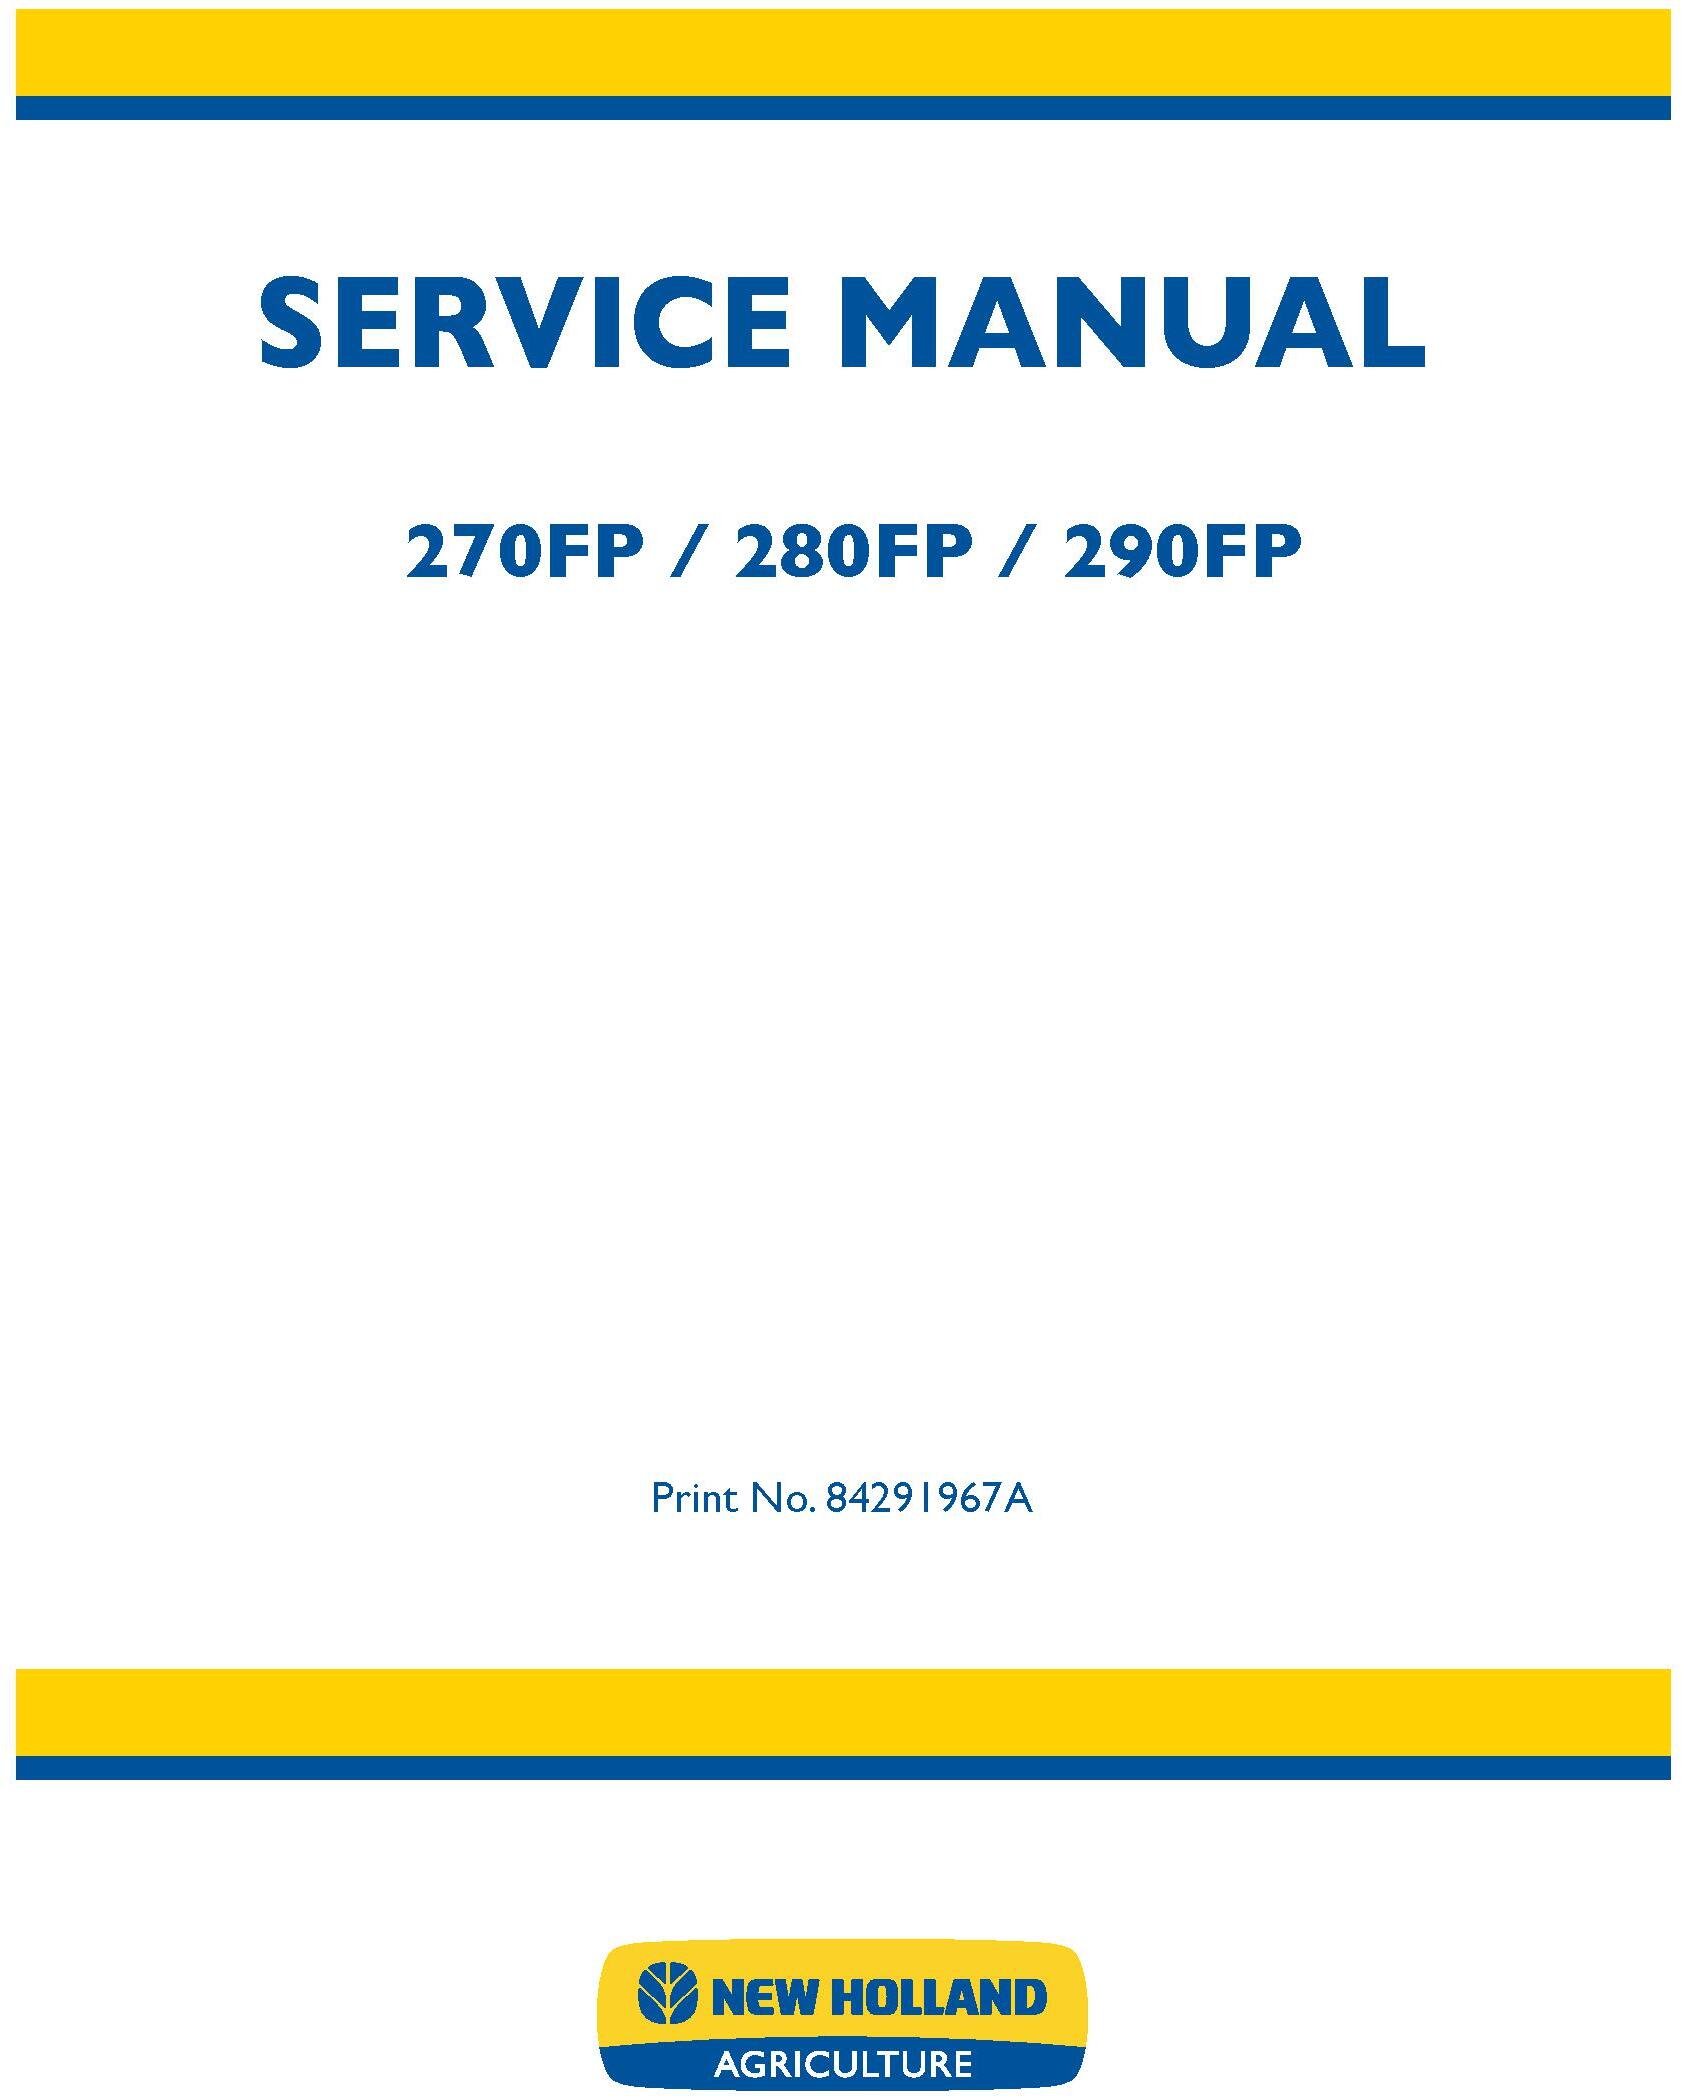 New Holland 270FP, 280FP, 290FP Forage Equipment Headers Service Manual - 20054